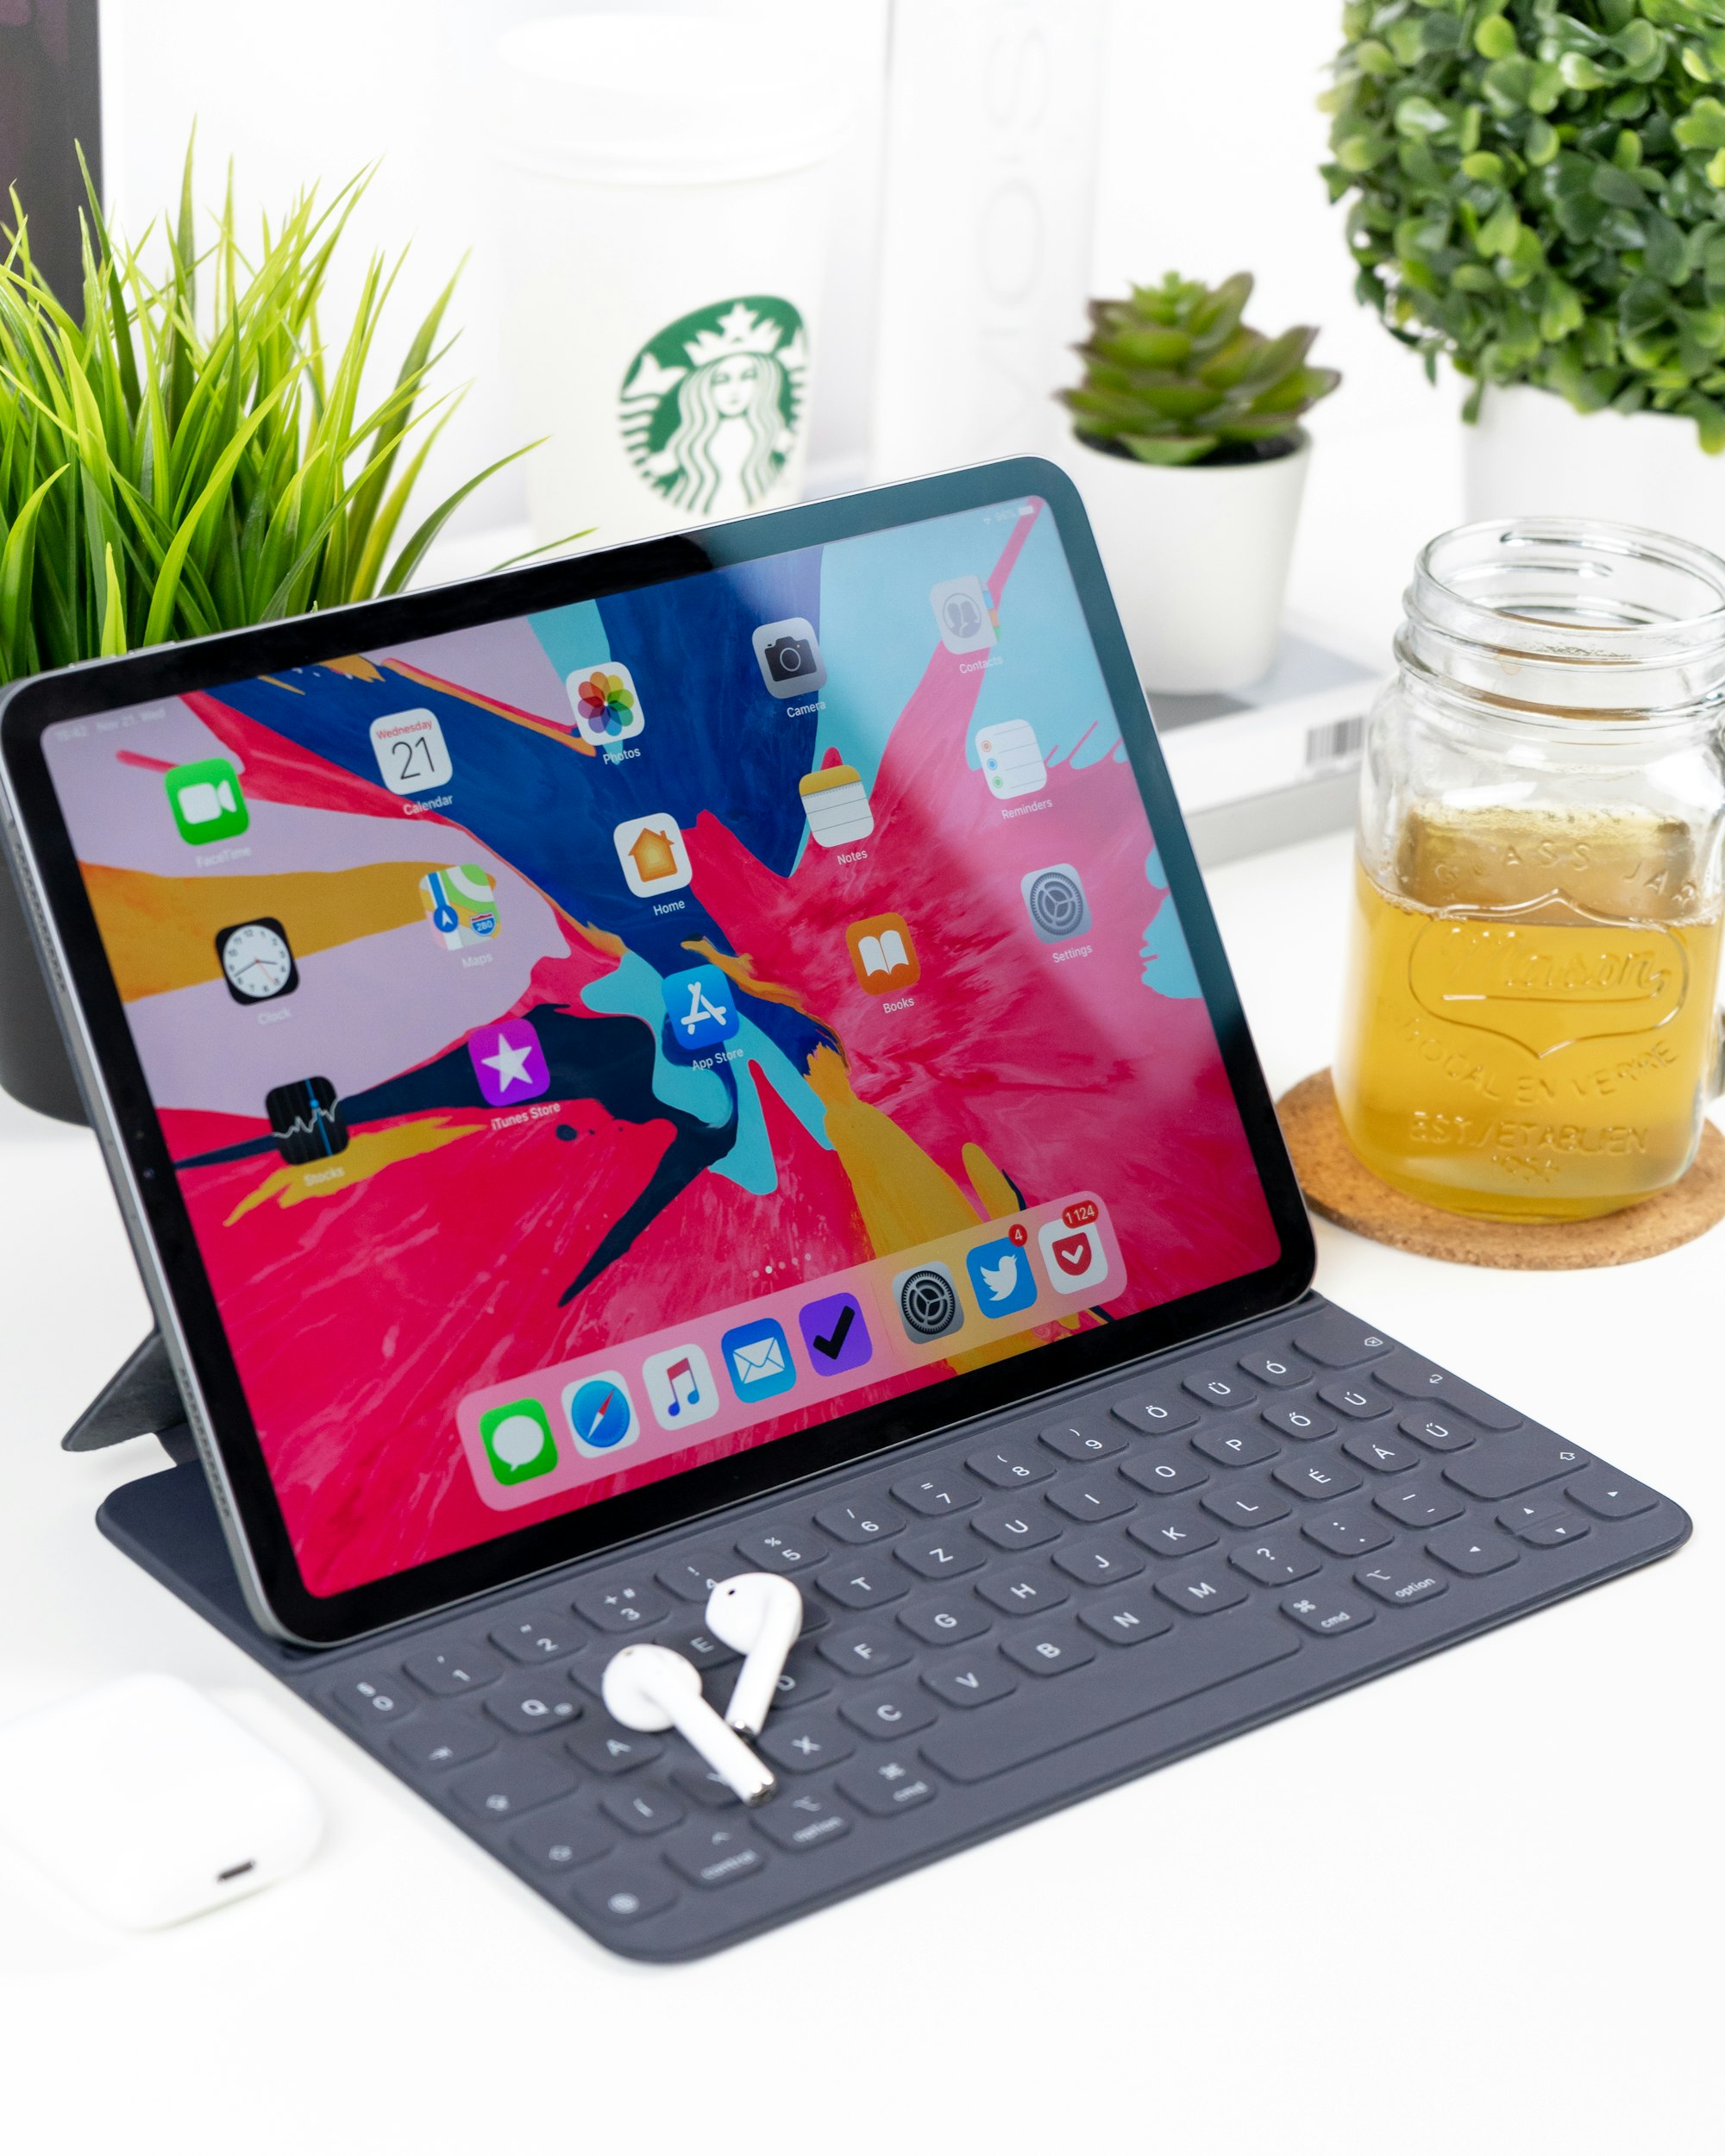 Apple iPad ... can it replace my laptop?